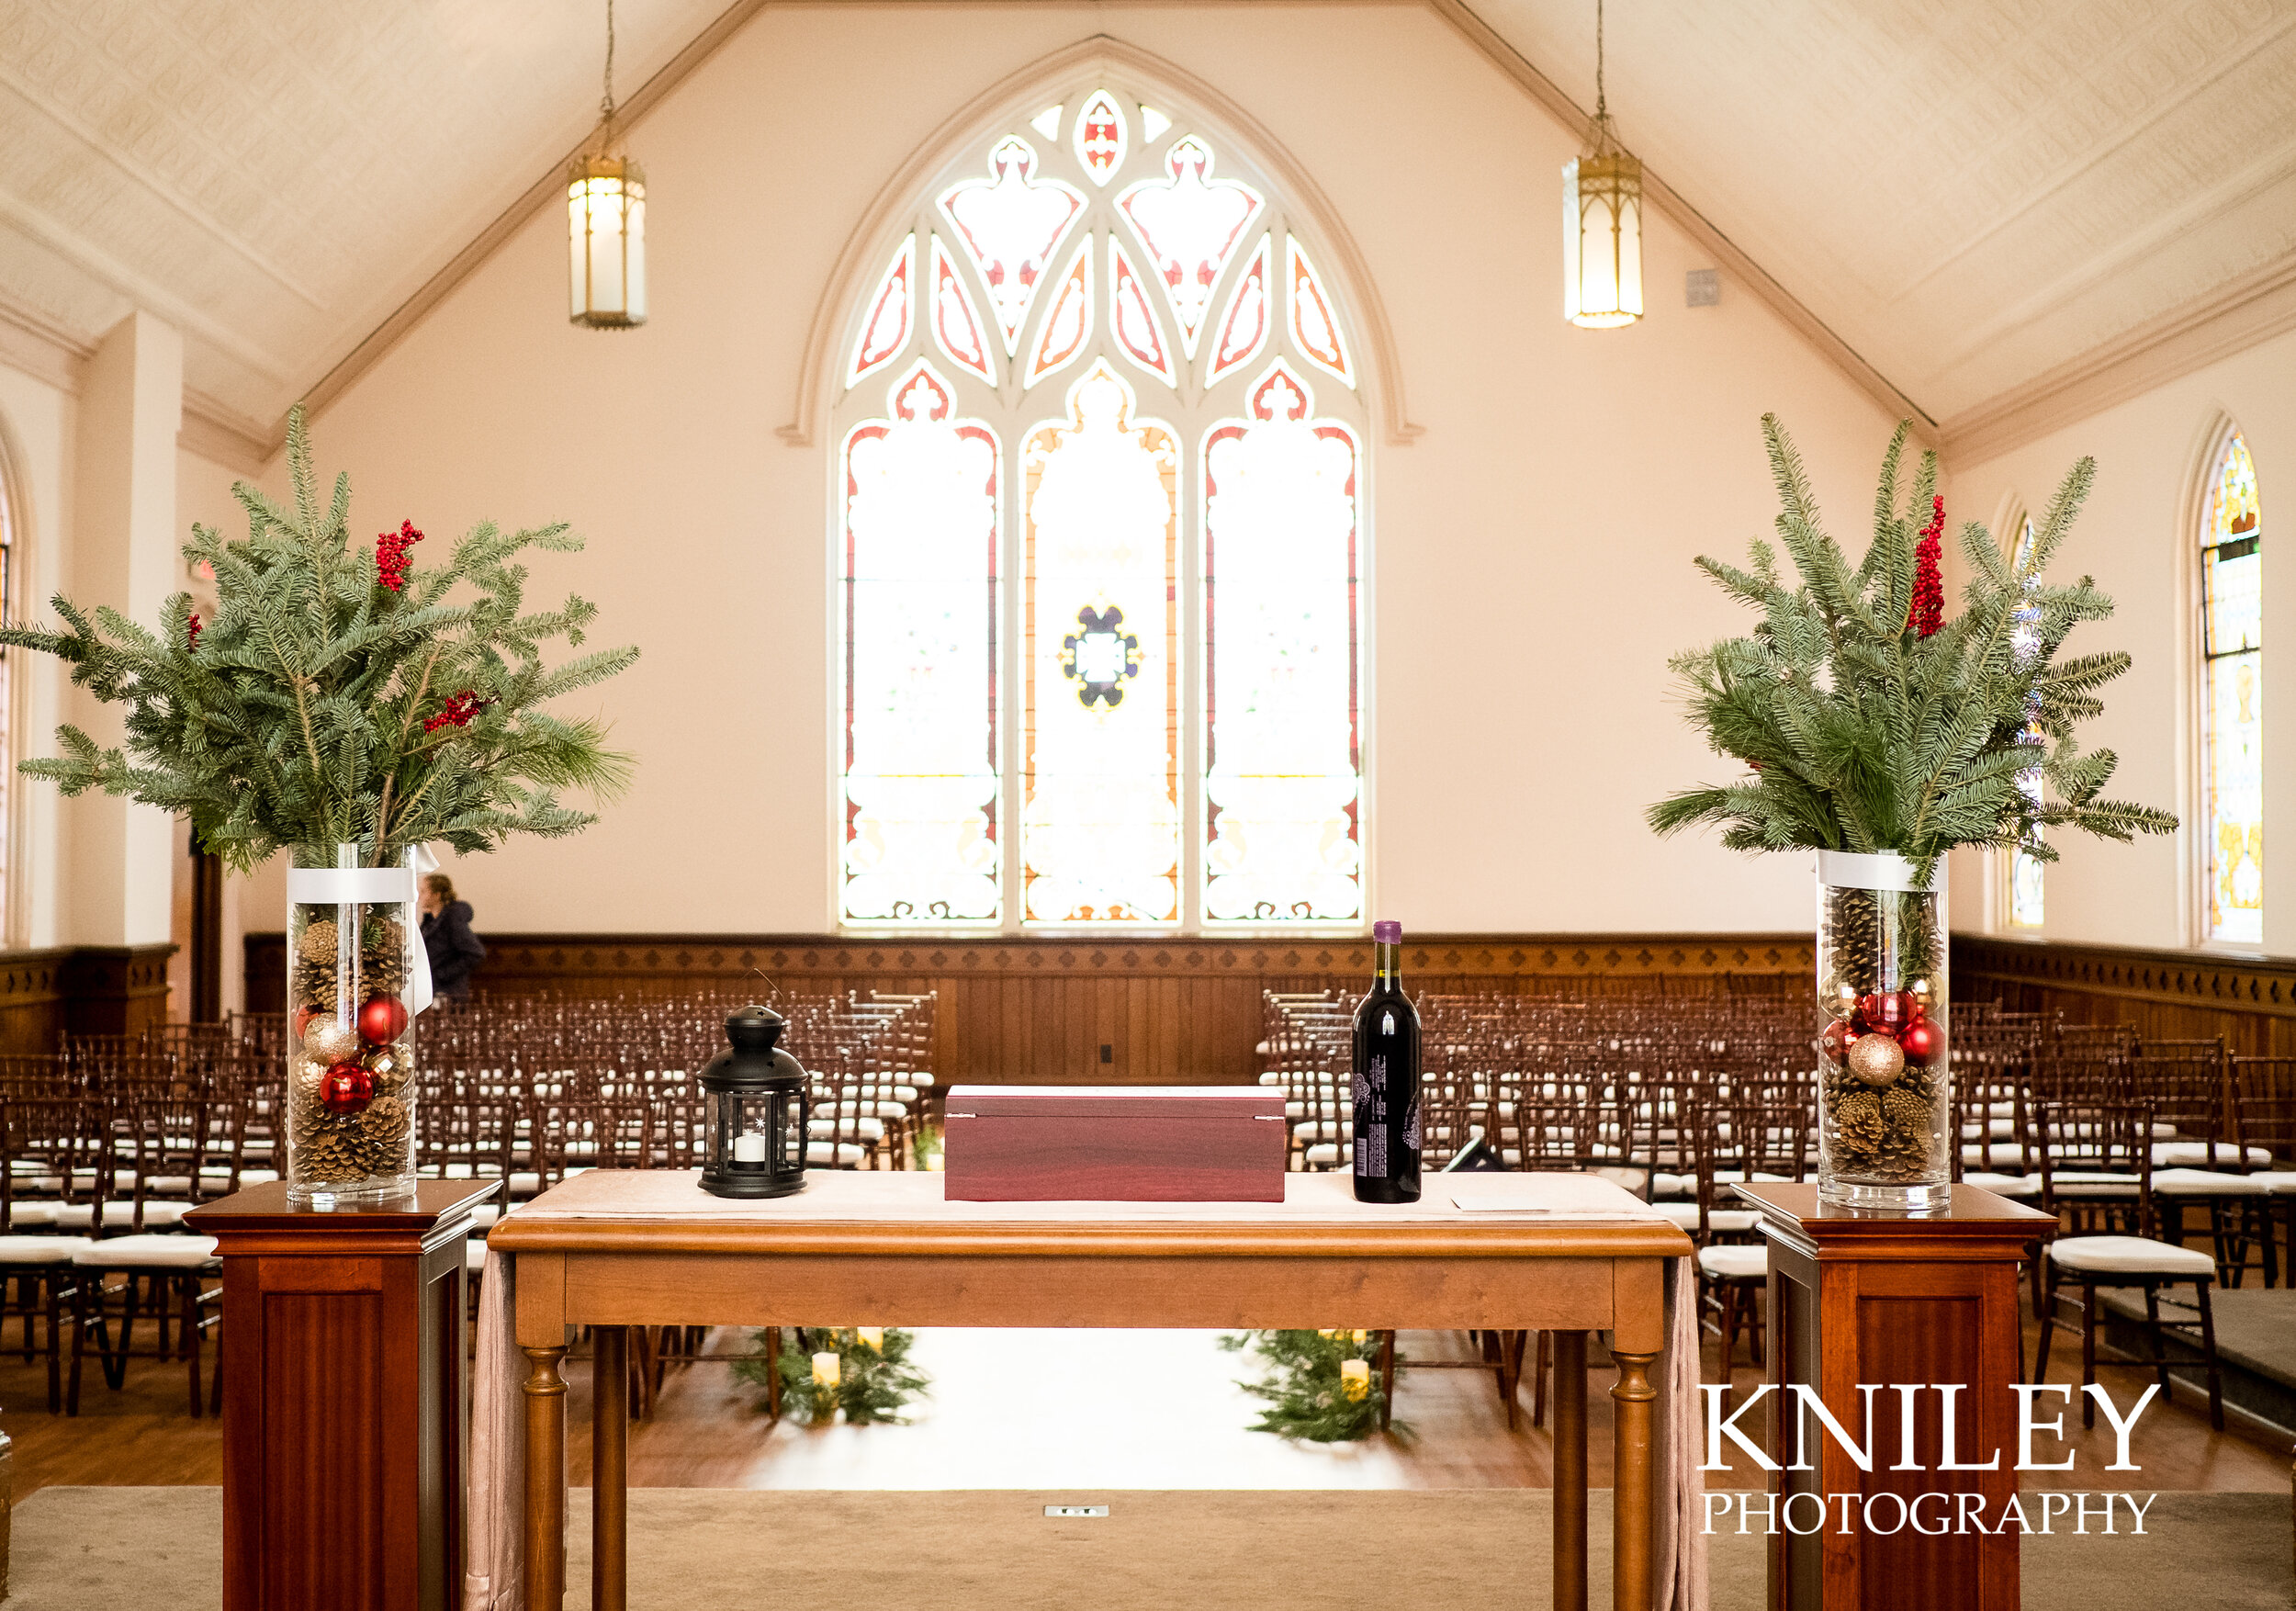 002-Kniley-Photography-Westminster-Chapel-Wedding-Venue-Picture-7632.jpg